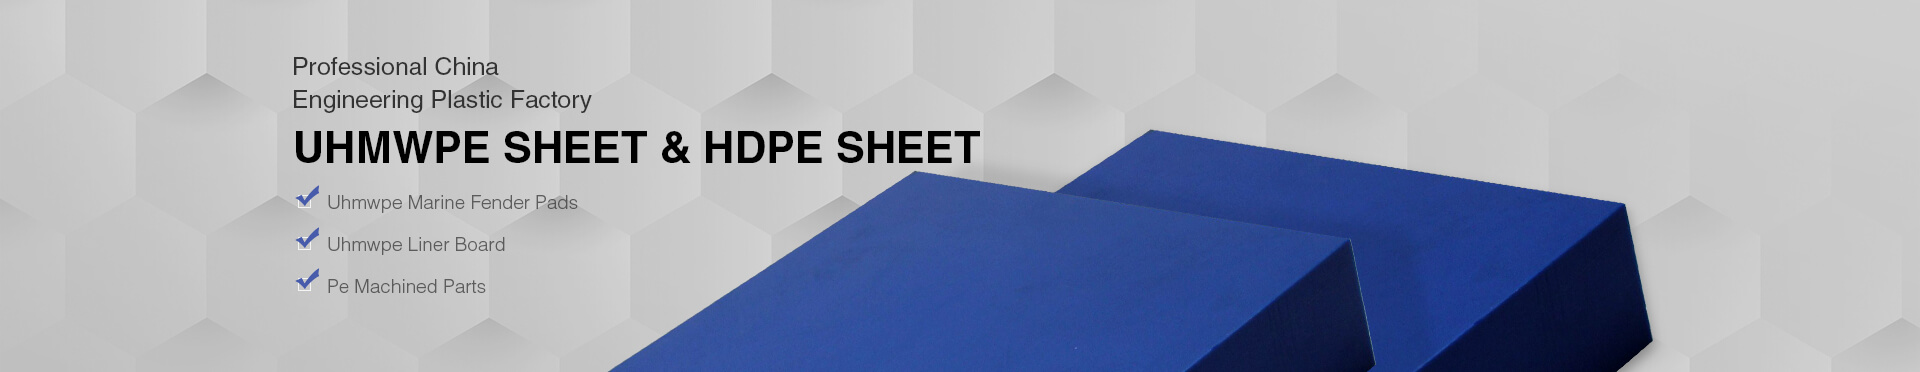 Uhmwpe Sheet Products